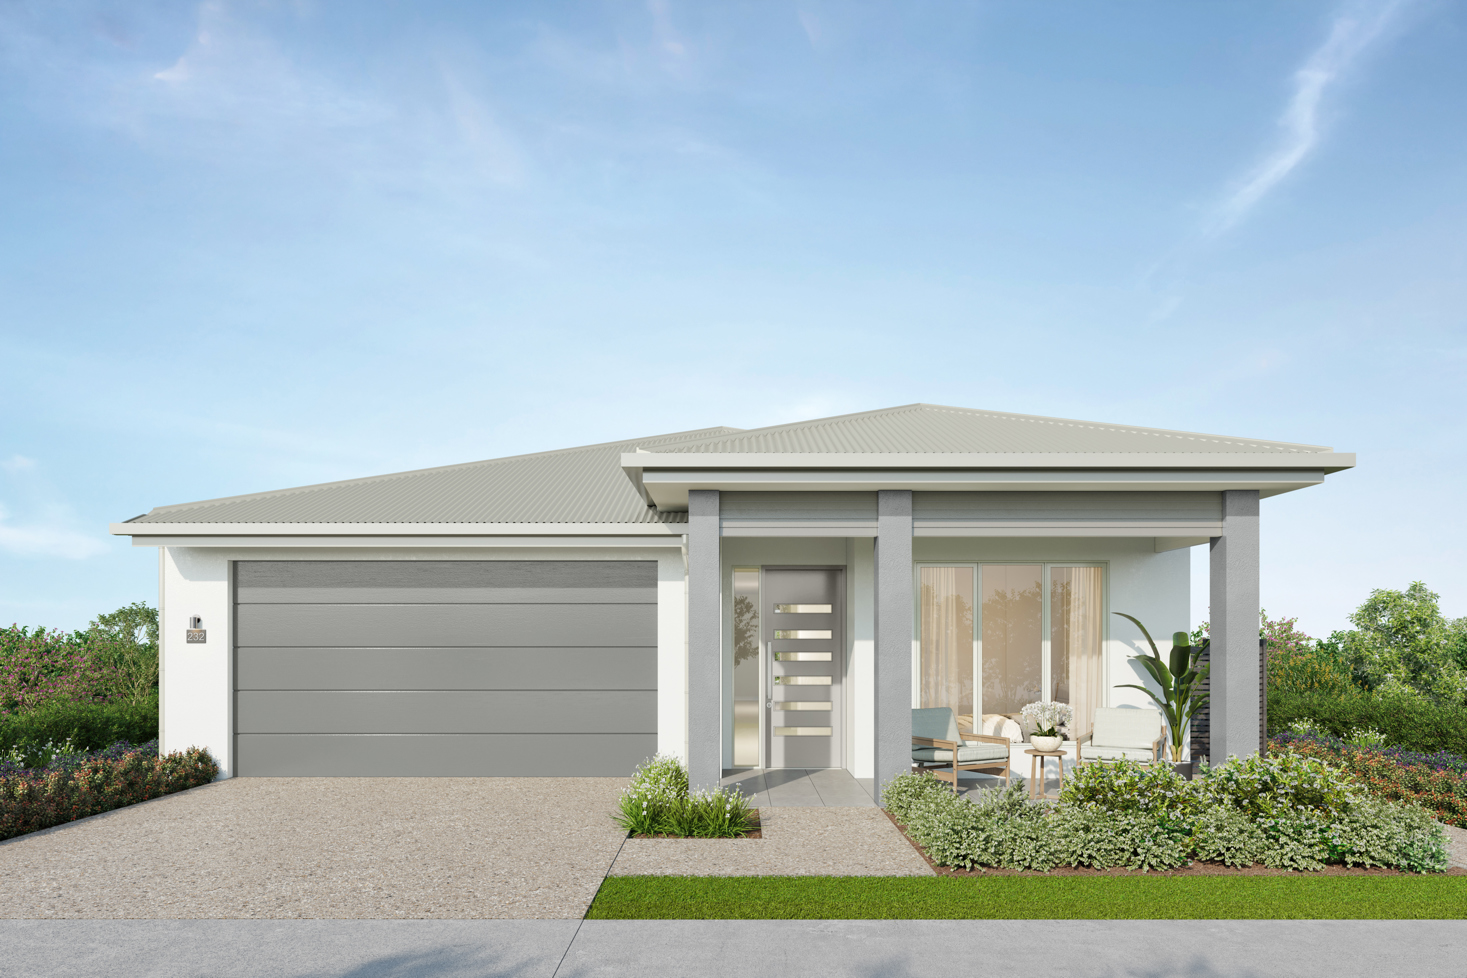 Facade render of the Yarra H3 house design with a hip roofline in coastal colour scheme, located at Stockland Halcyon Gables in The Hills district.